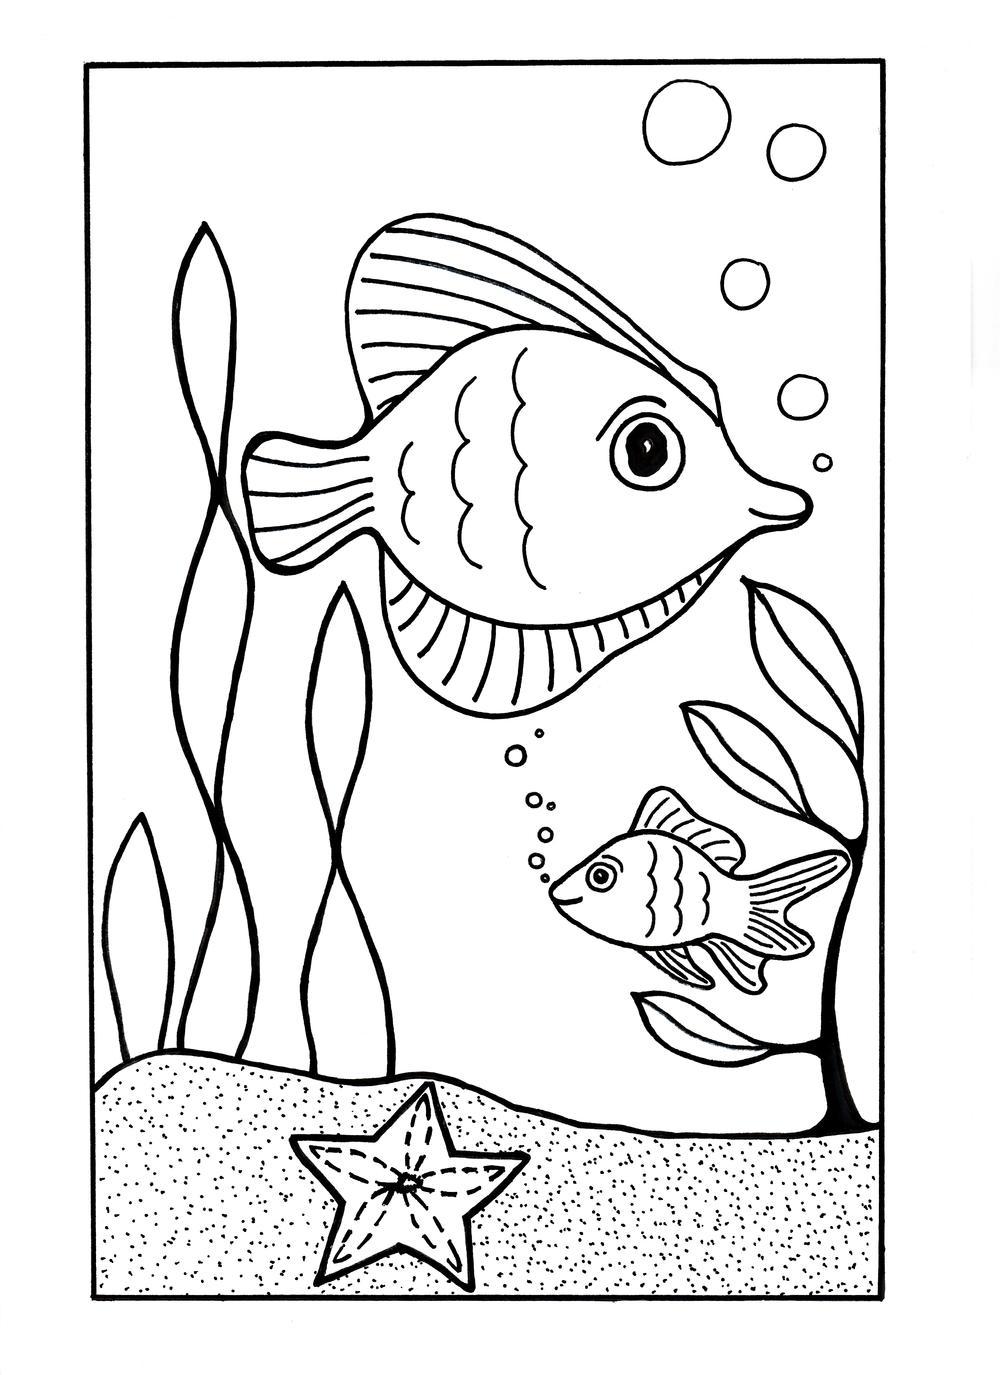 Ocean Waves Coloring Pages at GetColorings.com | Free printable